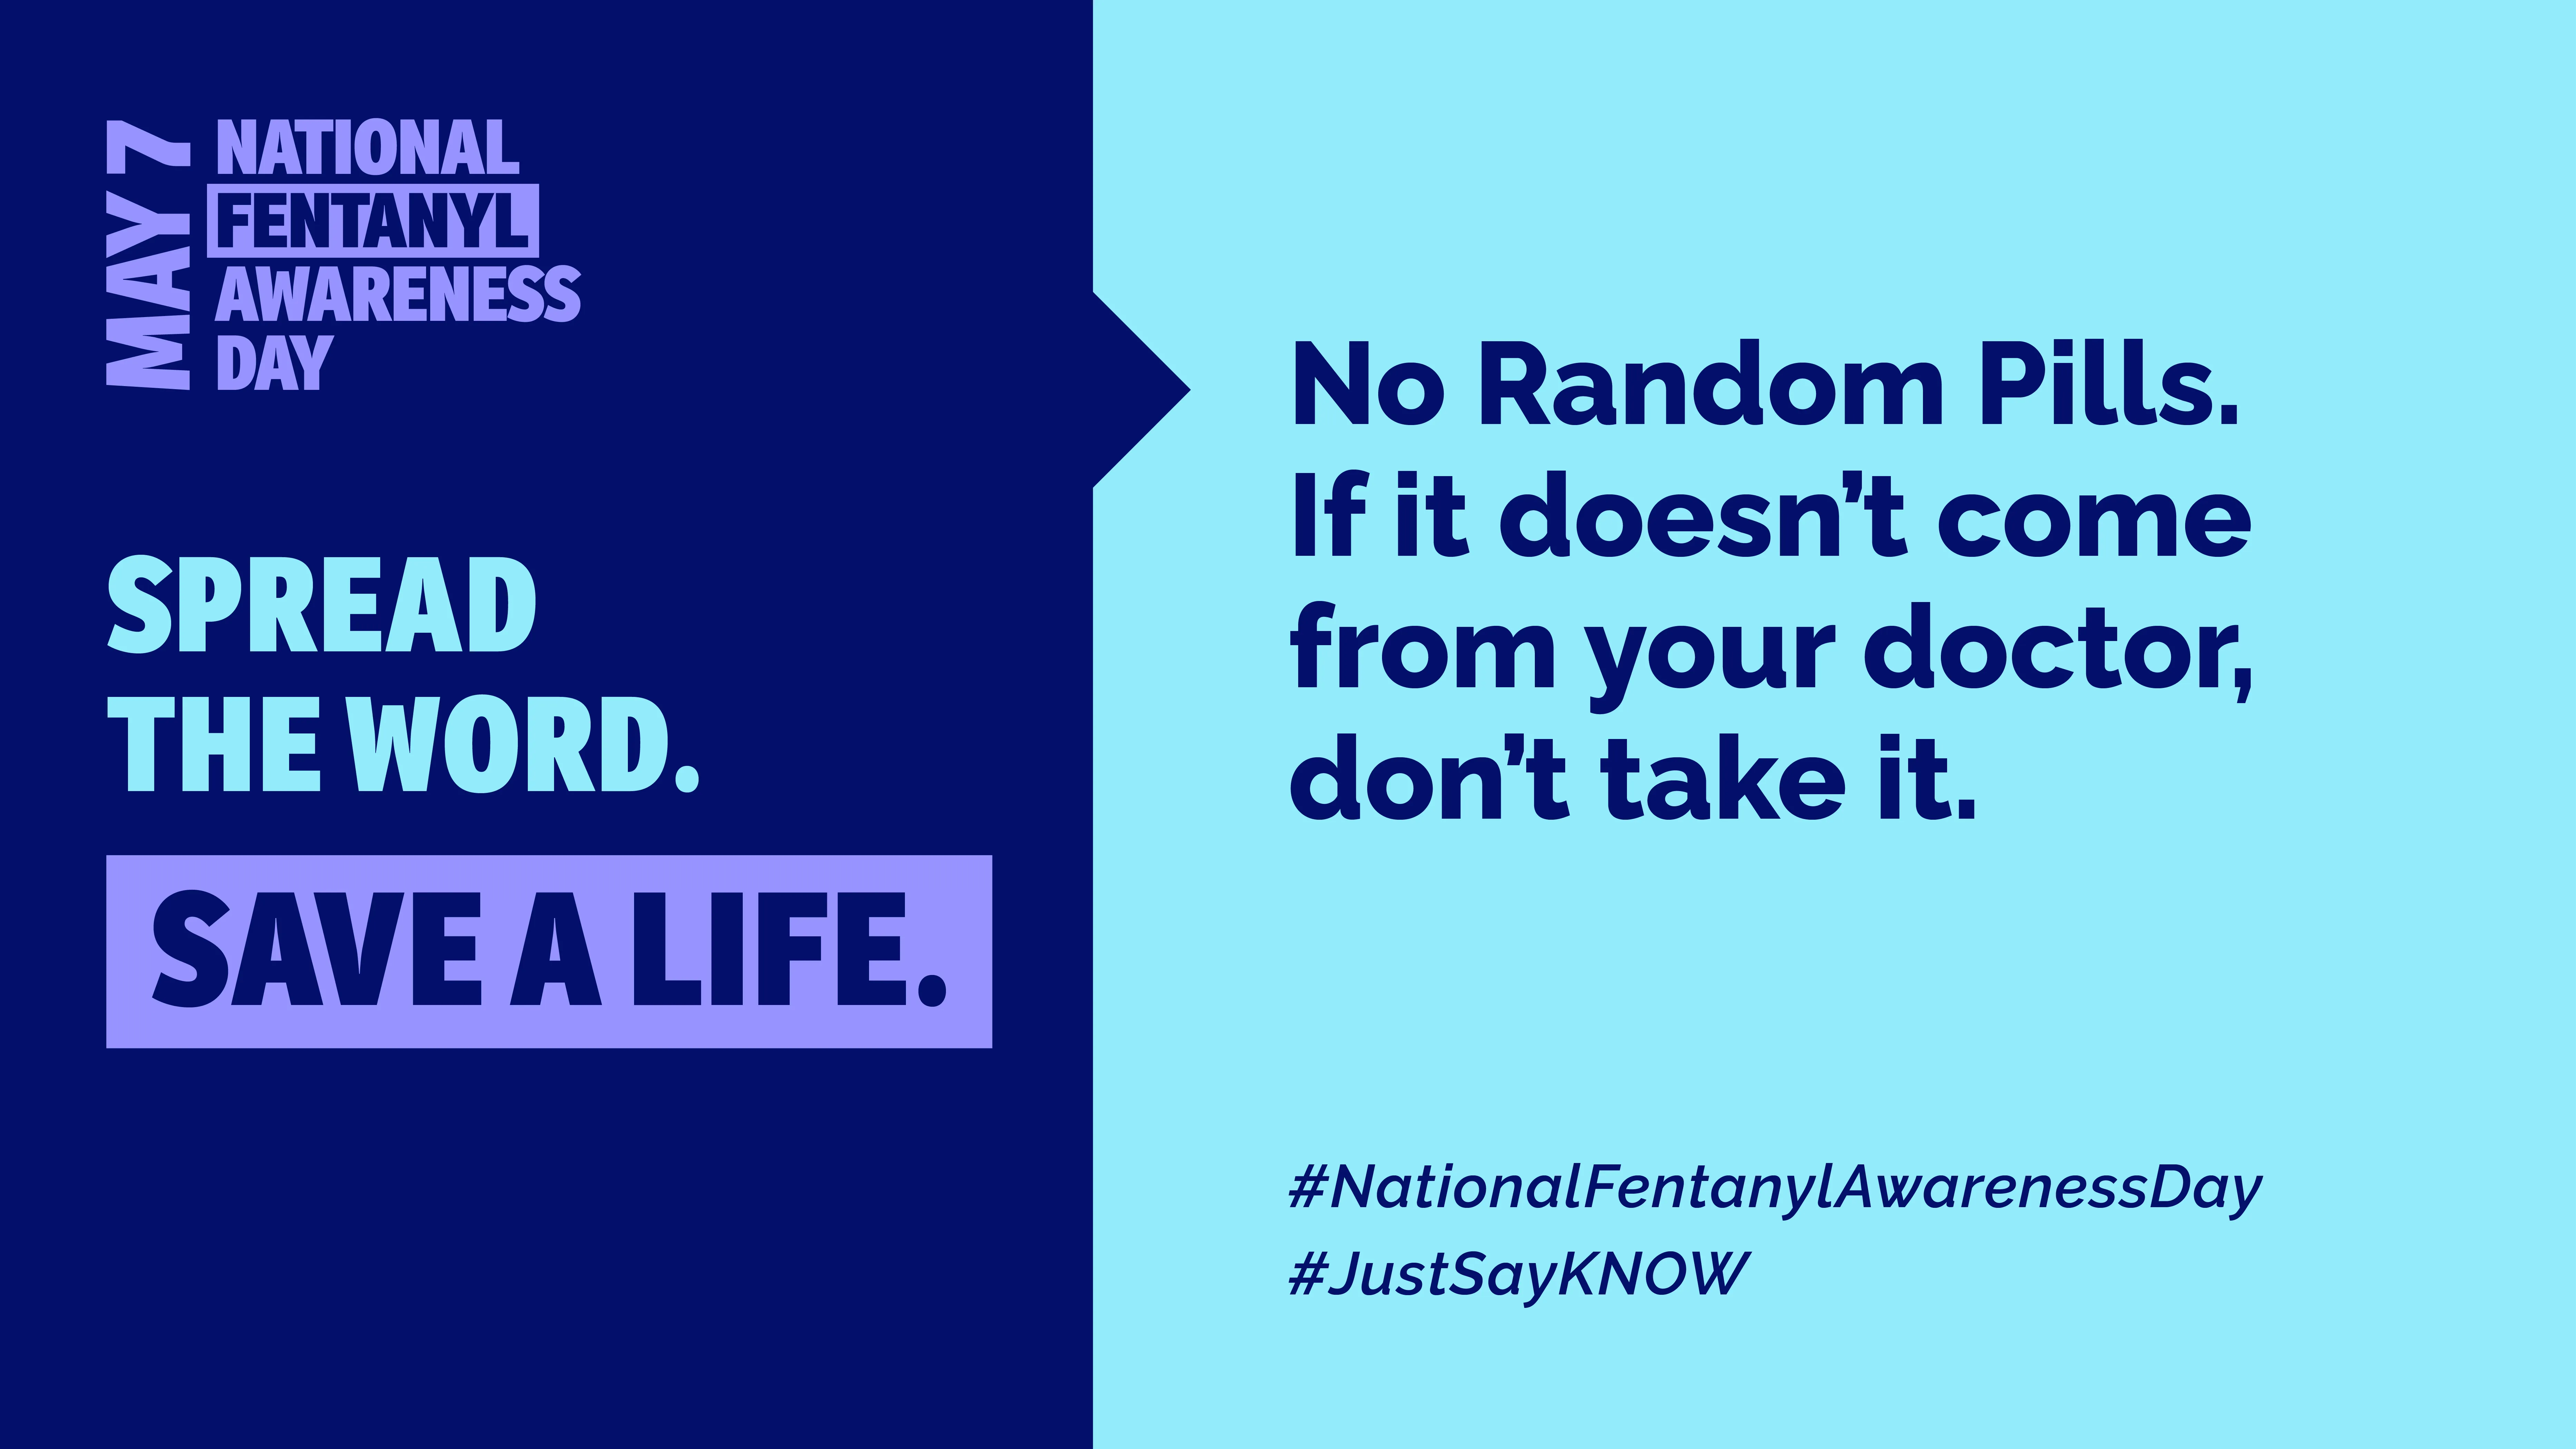 Spread the word. Save a life. No Random Pills. If it doesn't come from your doctor, don't take it. May 7 National Fentanyl Awareness Day